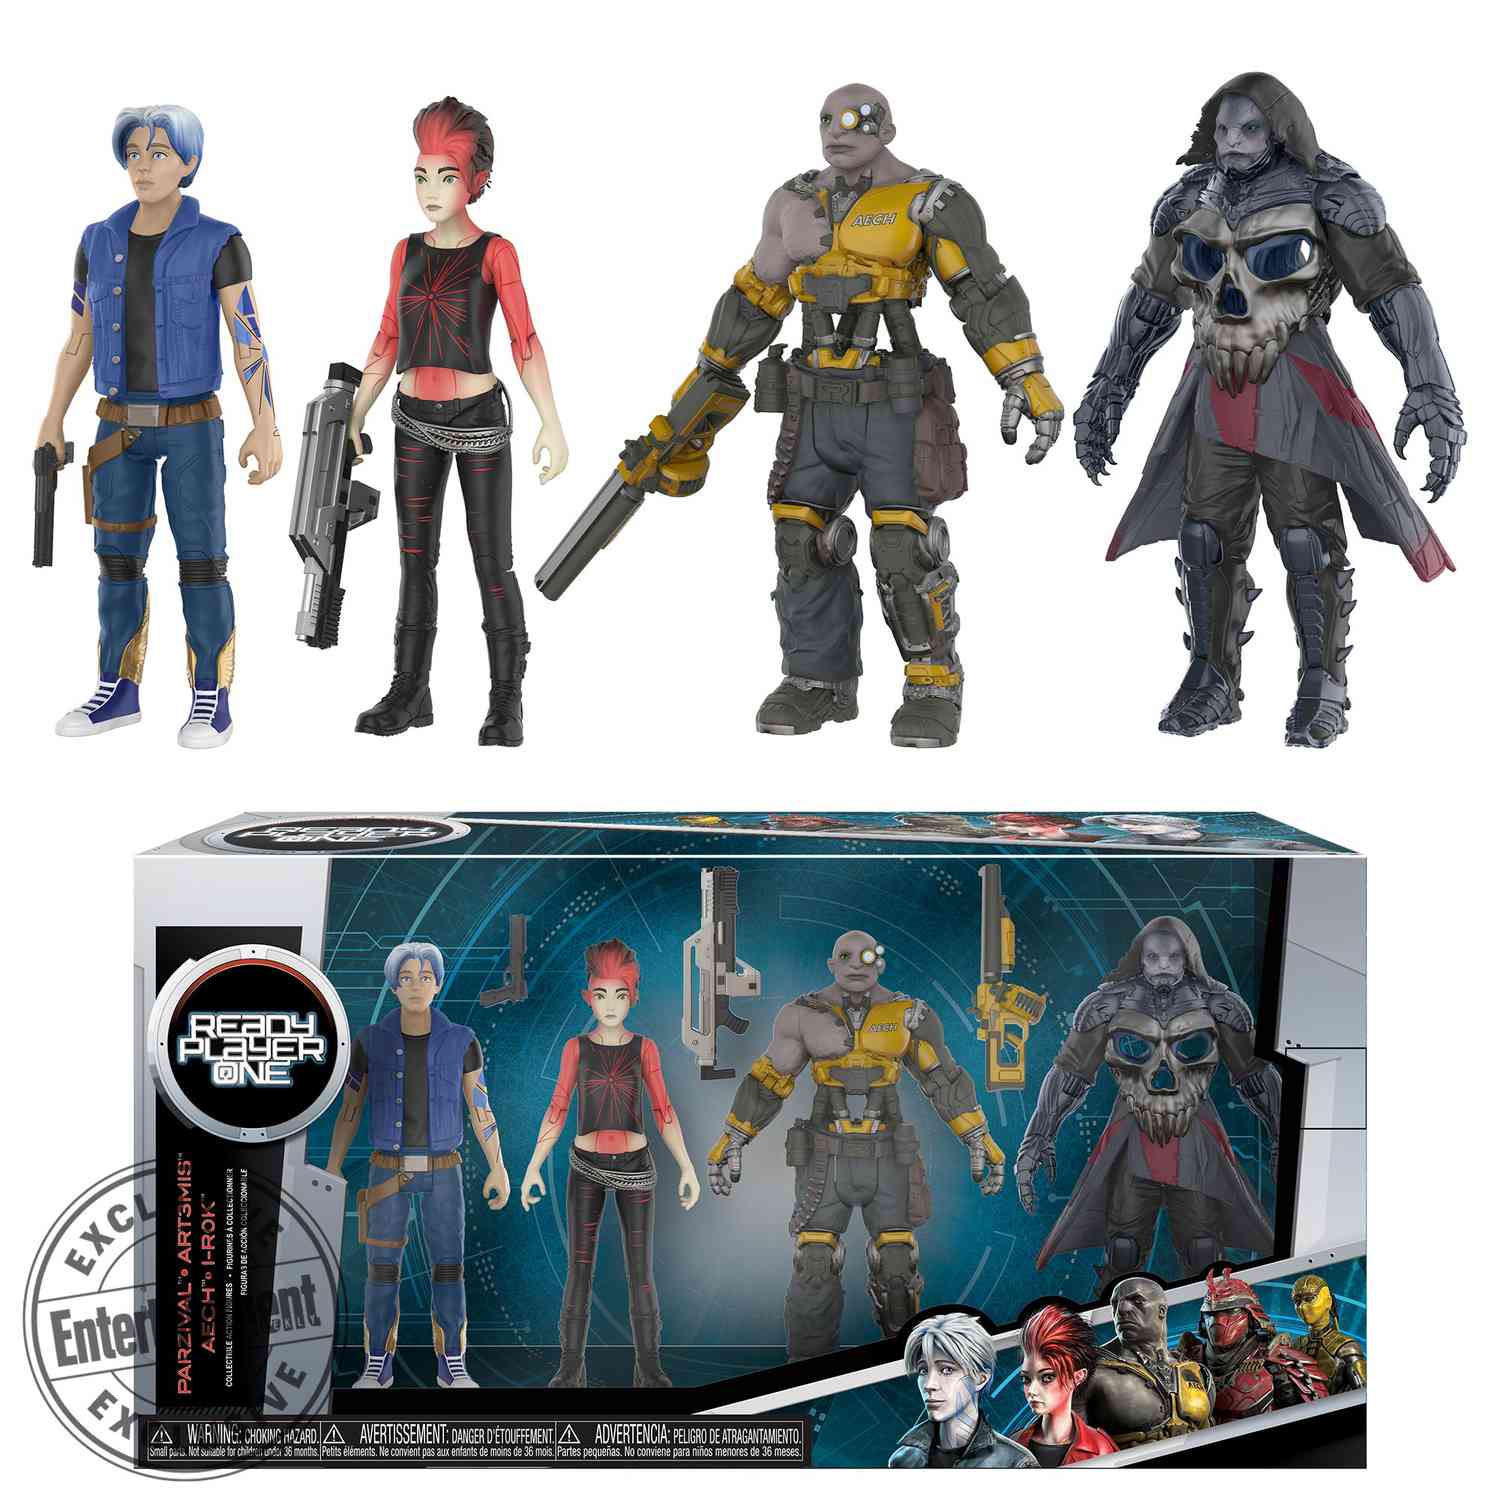 Action Figure 4-pack featuring Parzival, Aech, Art3mis,&nbsp;and i-R0k